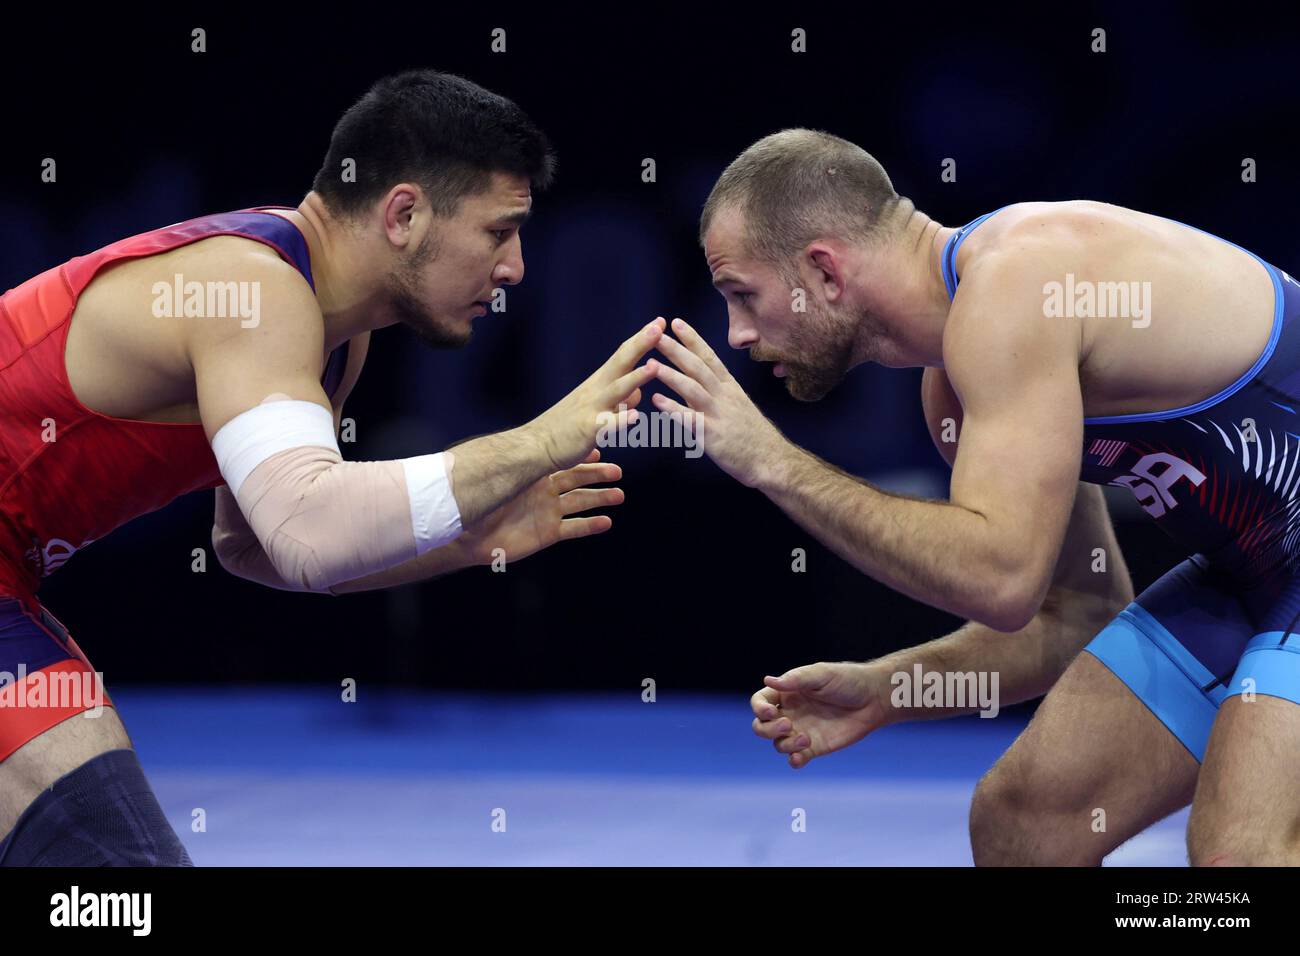 David Morris Taylor of Unites States of America (blue) and Azamat Dauletbekov of Kazakhstan compete during the mens freestyle 86 kg semi-final match at the Wrestling World Championships in Belgrade, Serbia on